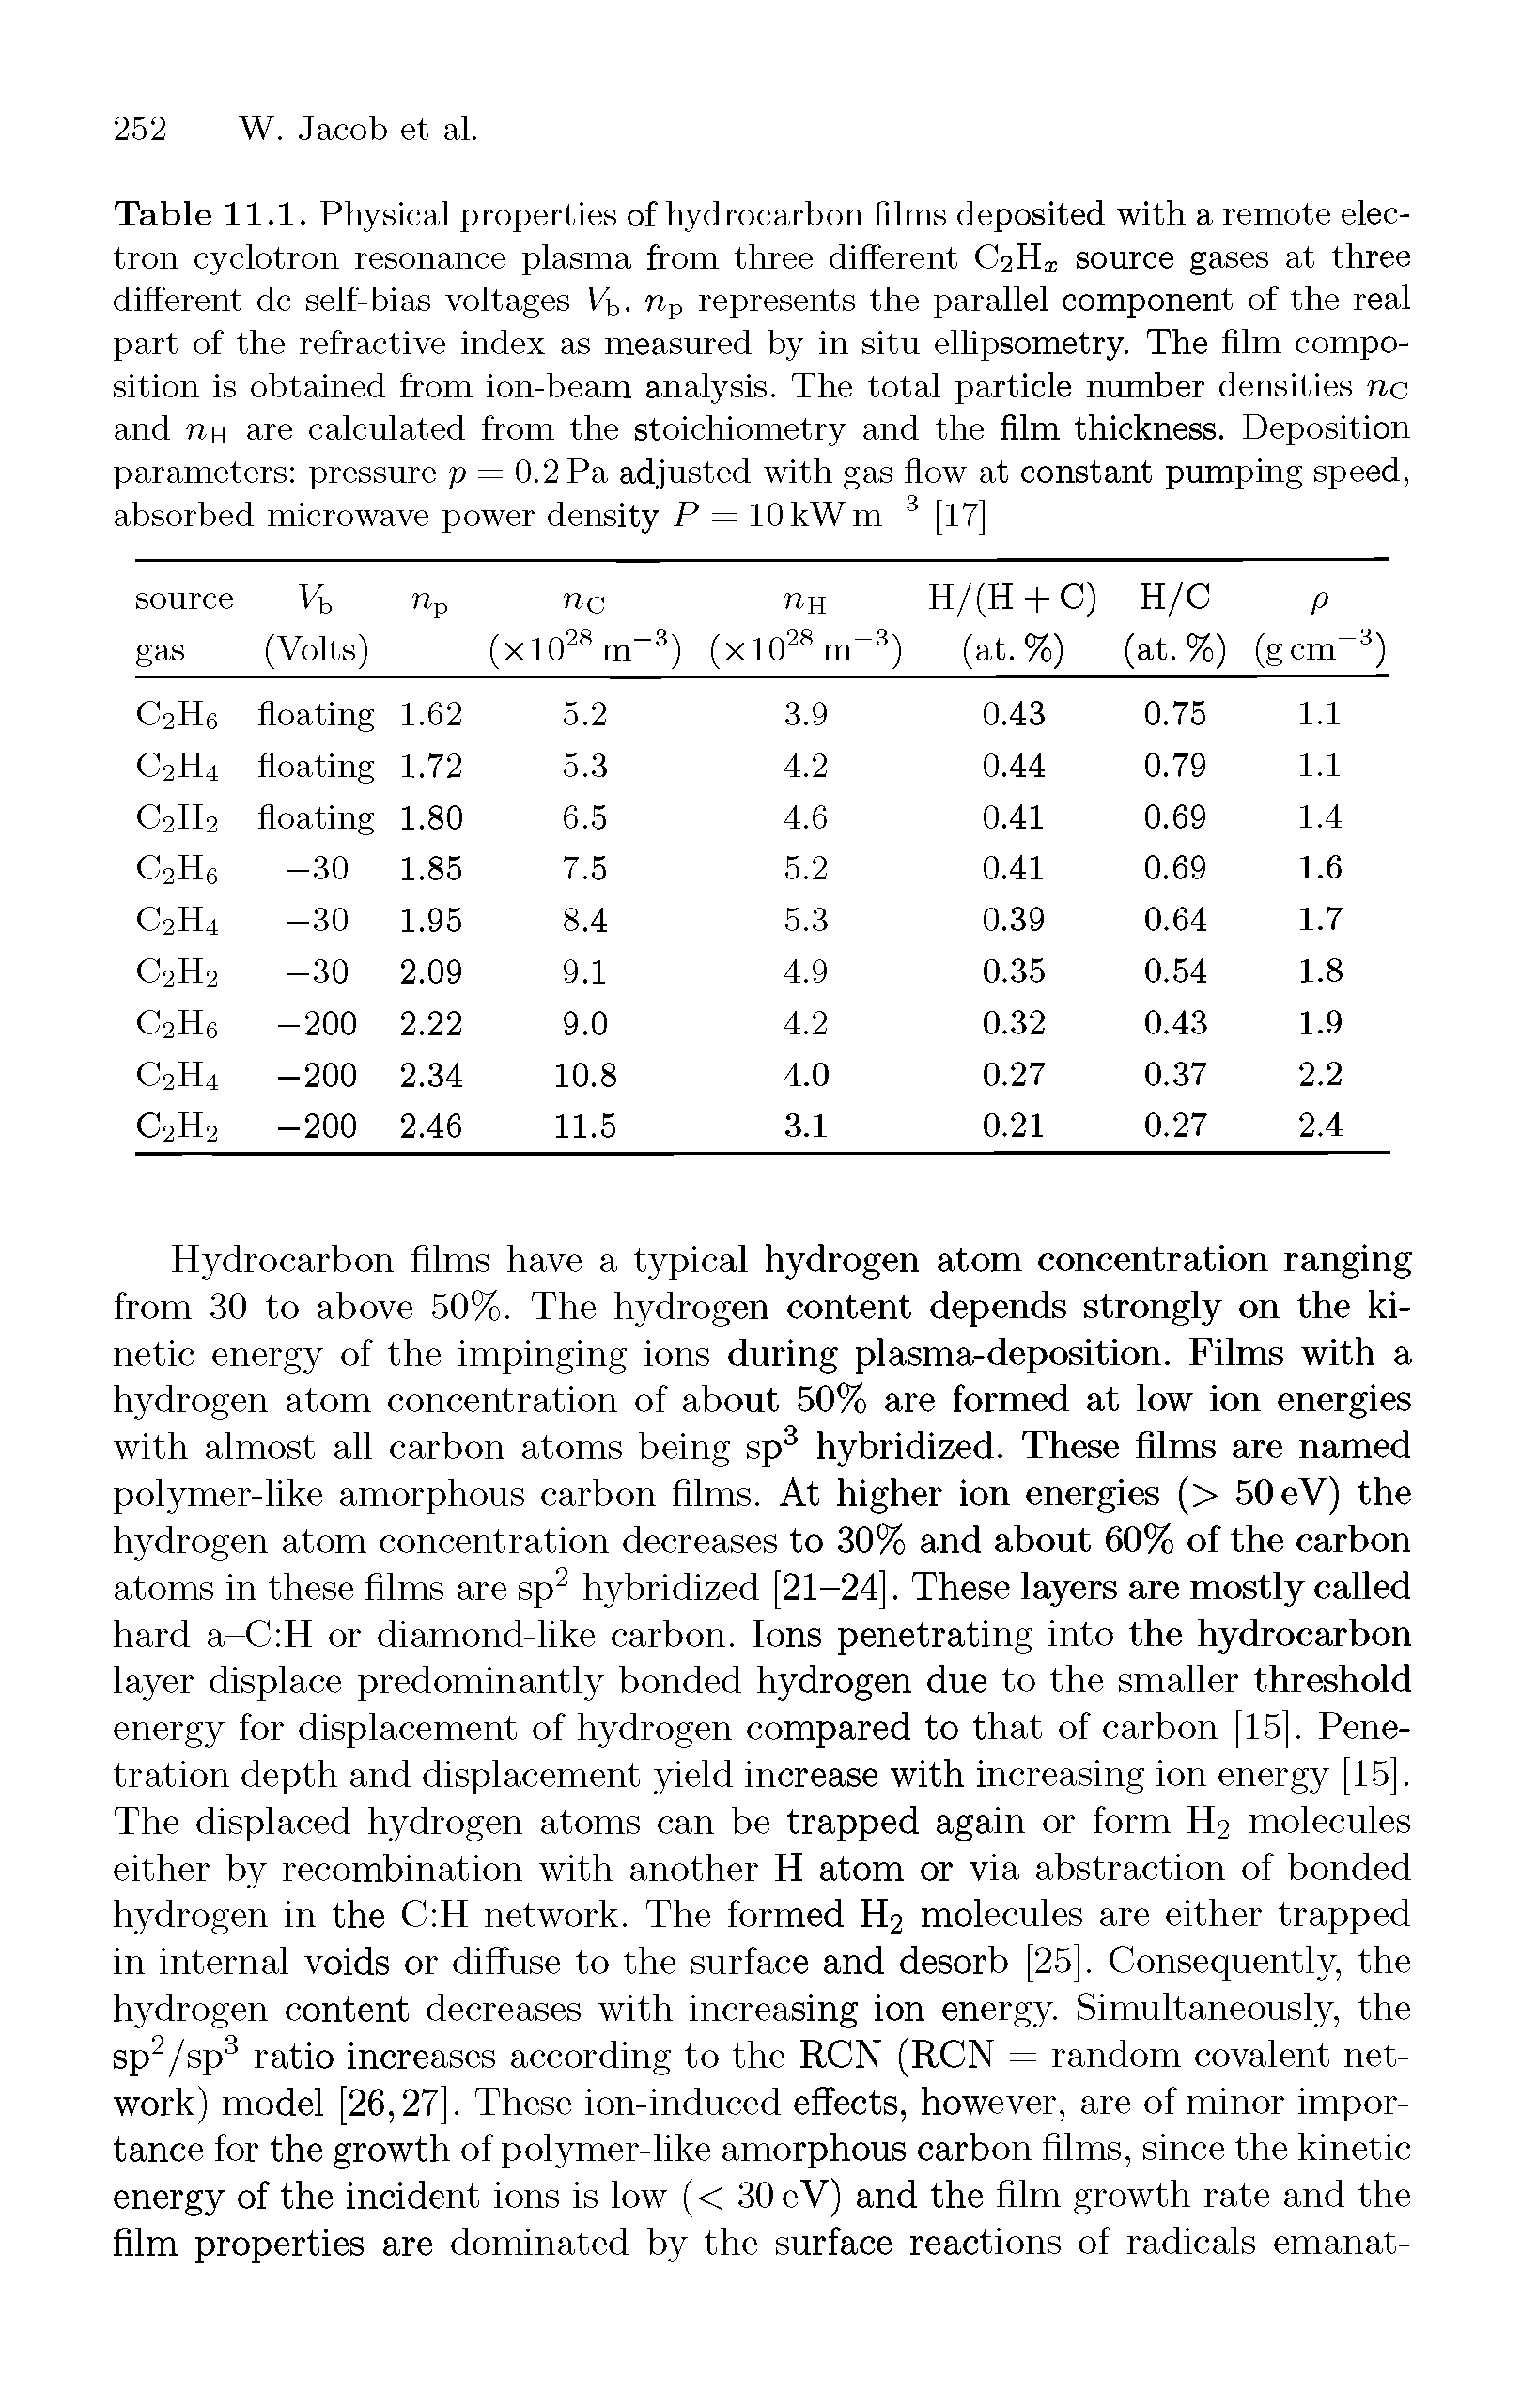 Table 11.1. Physical properties of hydrocarbon films deposited with a remote electron cyclotron resonance plasma from three different C2Hz source gases at three different dc self-bias voltages 1% np represents the parallel component of the real part of the refractive index as measured by in situ ellipsometry. The film composition is obtained from ion-beam analysis. The total particle number densities nc and n-H are calculated from the stoichiometry and the film thickness. Deposition parameters pressure p = 0.2 Pa adjusted with gas flow at constant pumping speed, absorbed microwave power density P = 10 kW nT3 [17]...